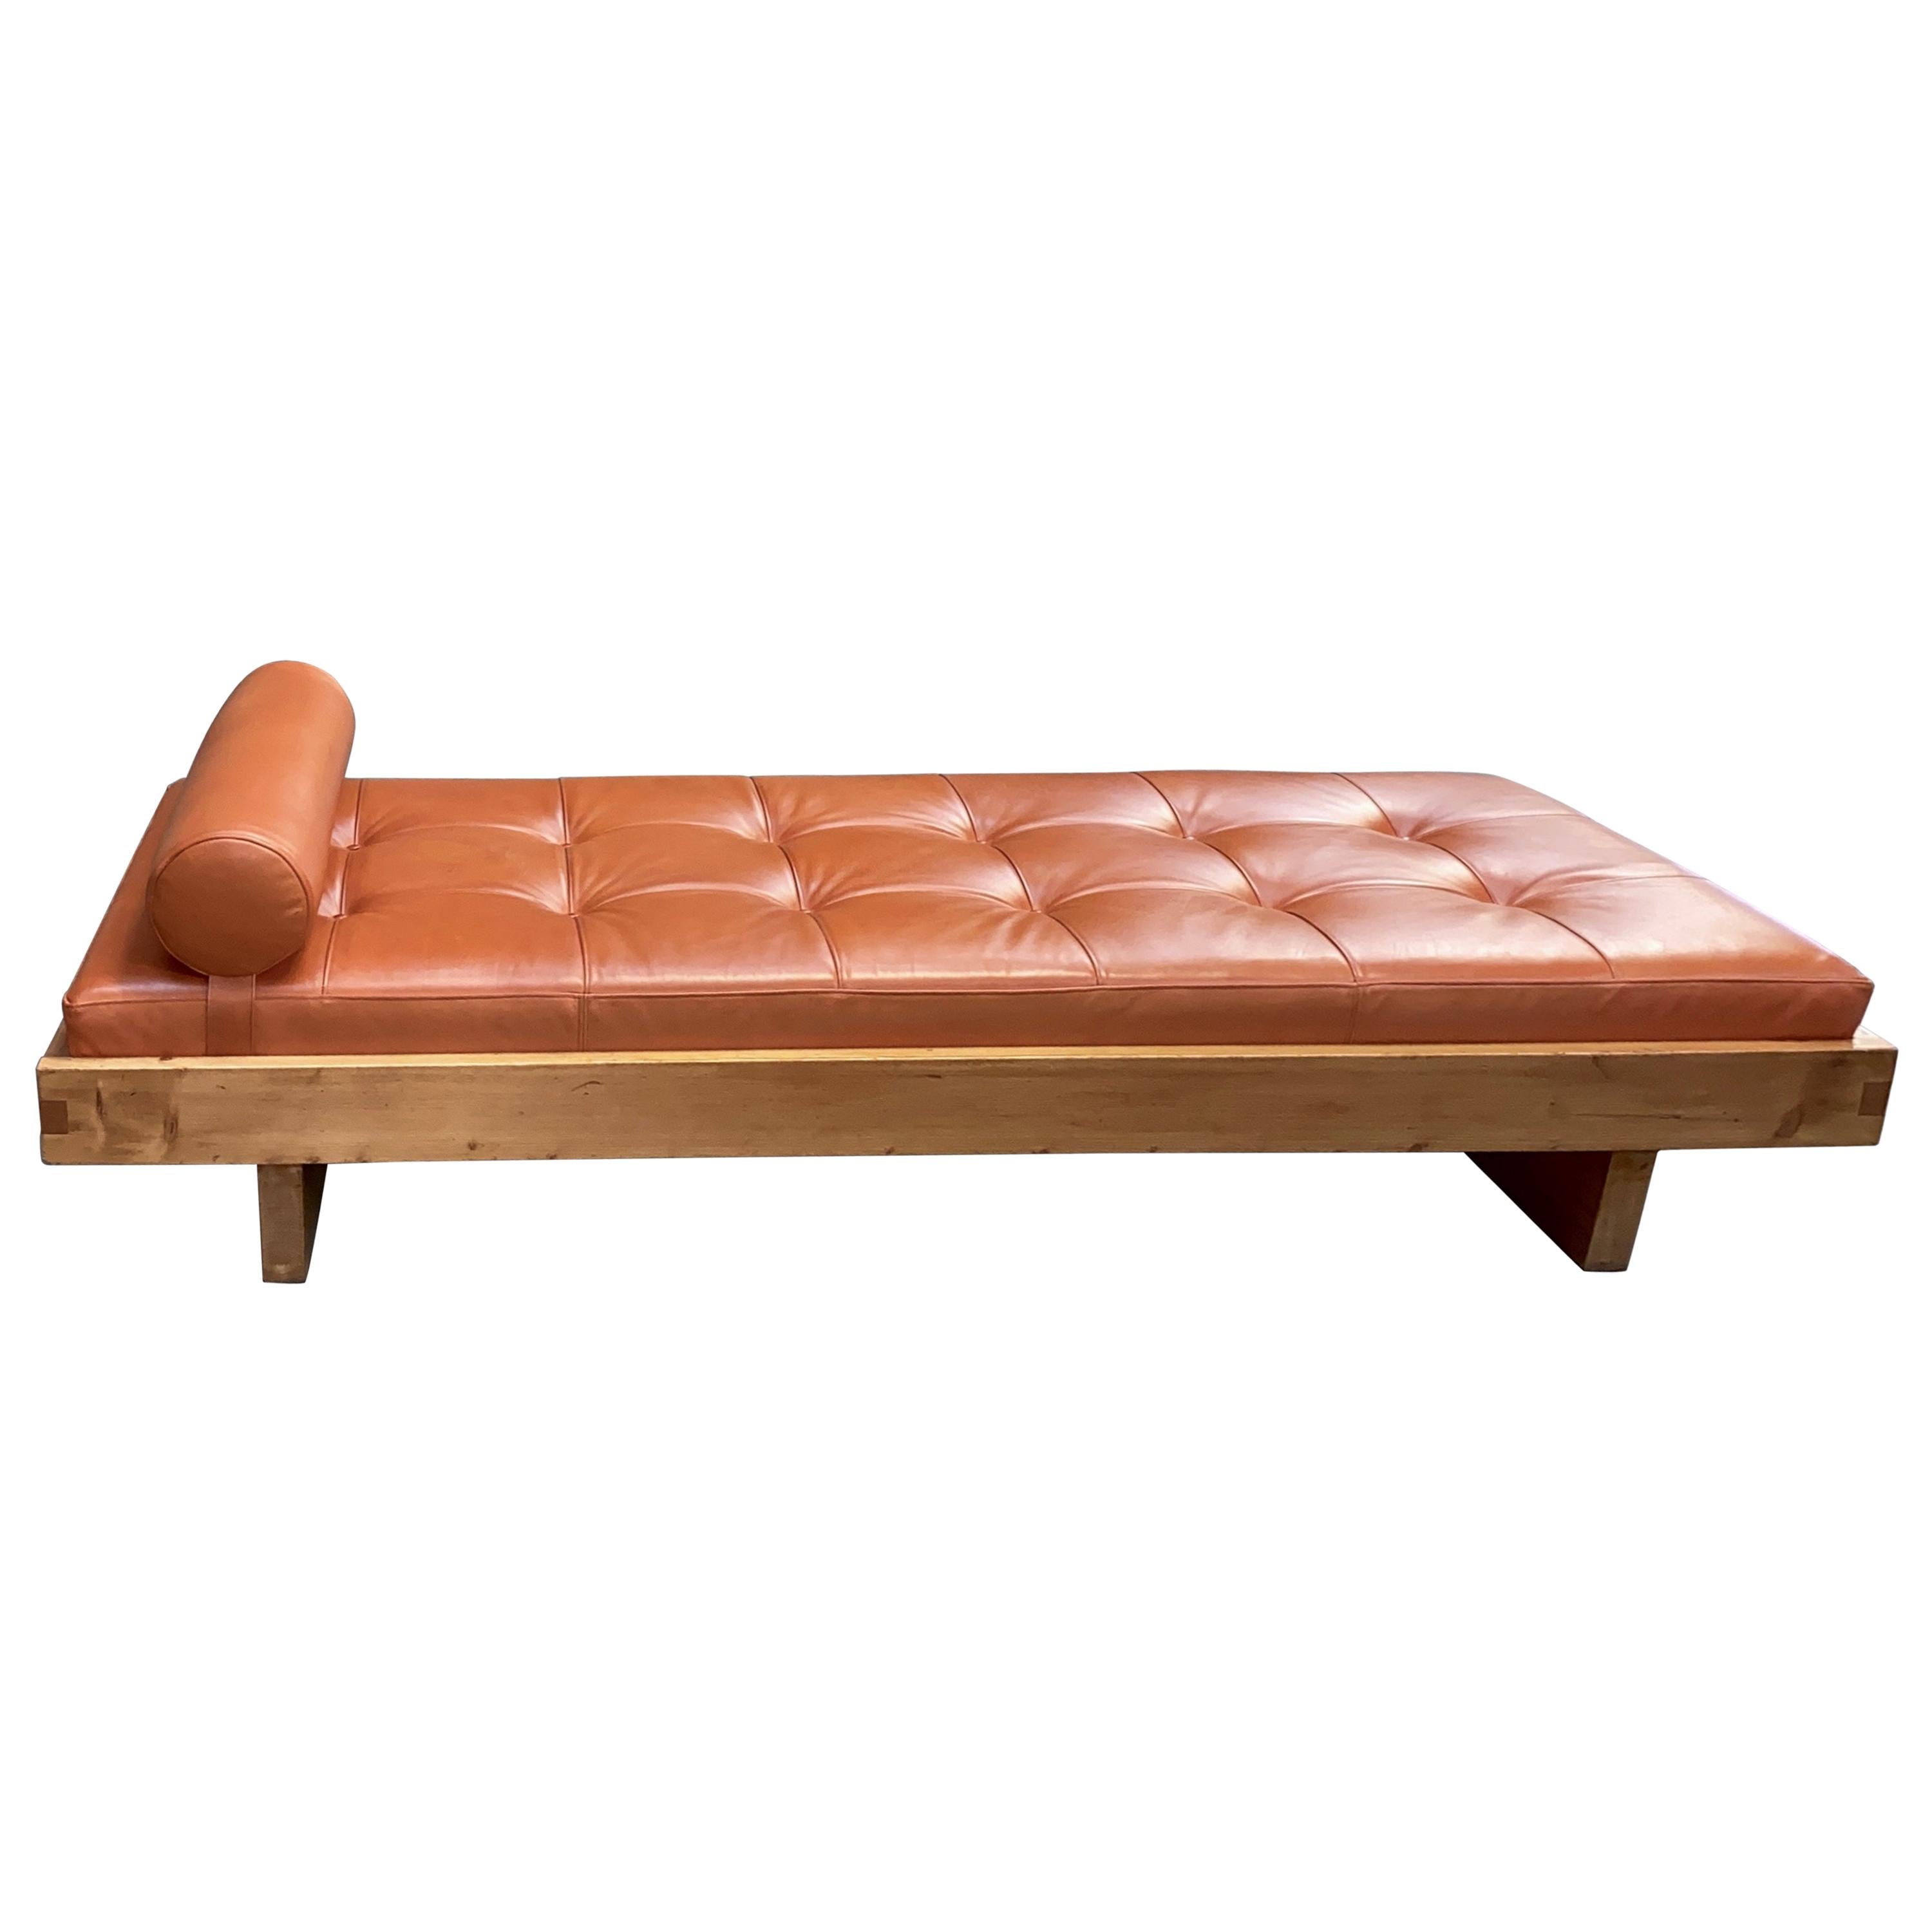 Charlotte Perriand Daybed in Ash from Méribel Les Allues